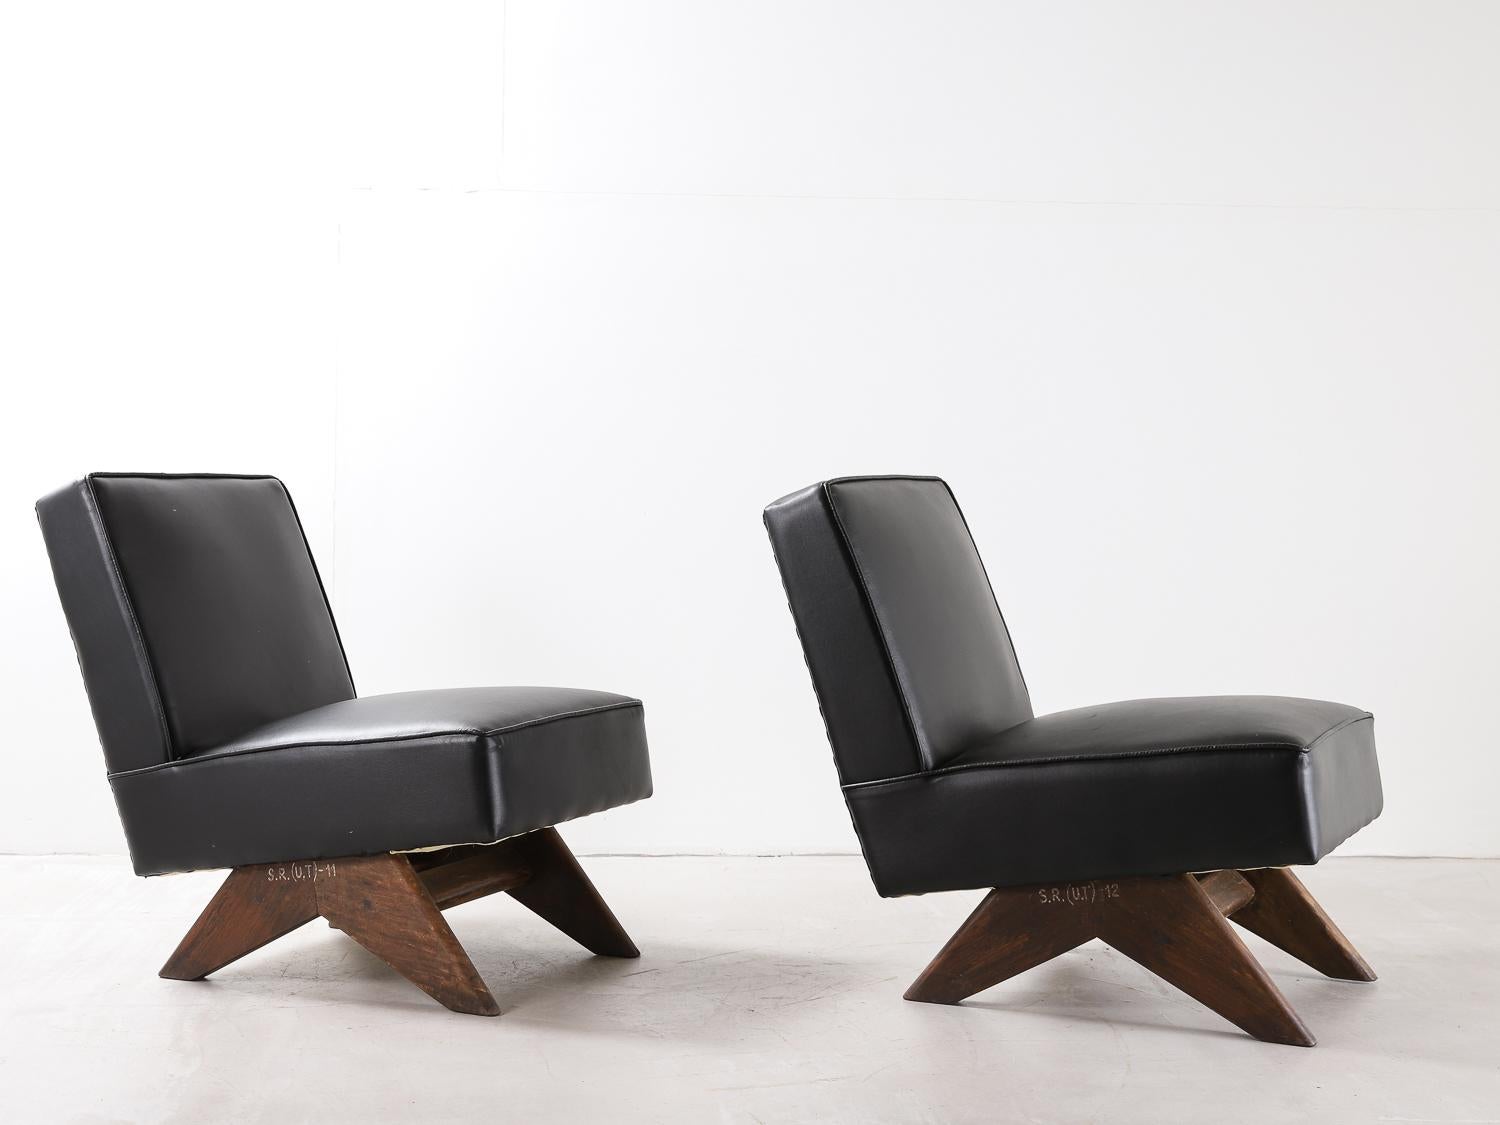 Indian Pair Of Pierre Jeanneret ‘Fireside’ Chairs, model No. PJ-SI-36-A For Sale